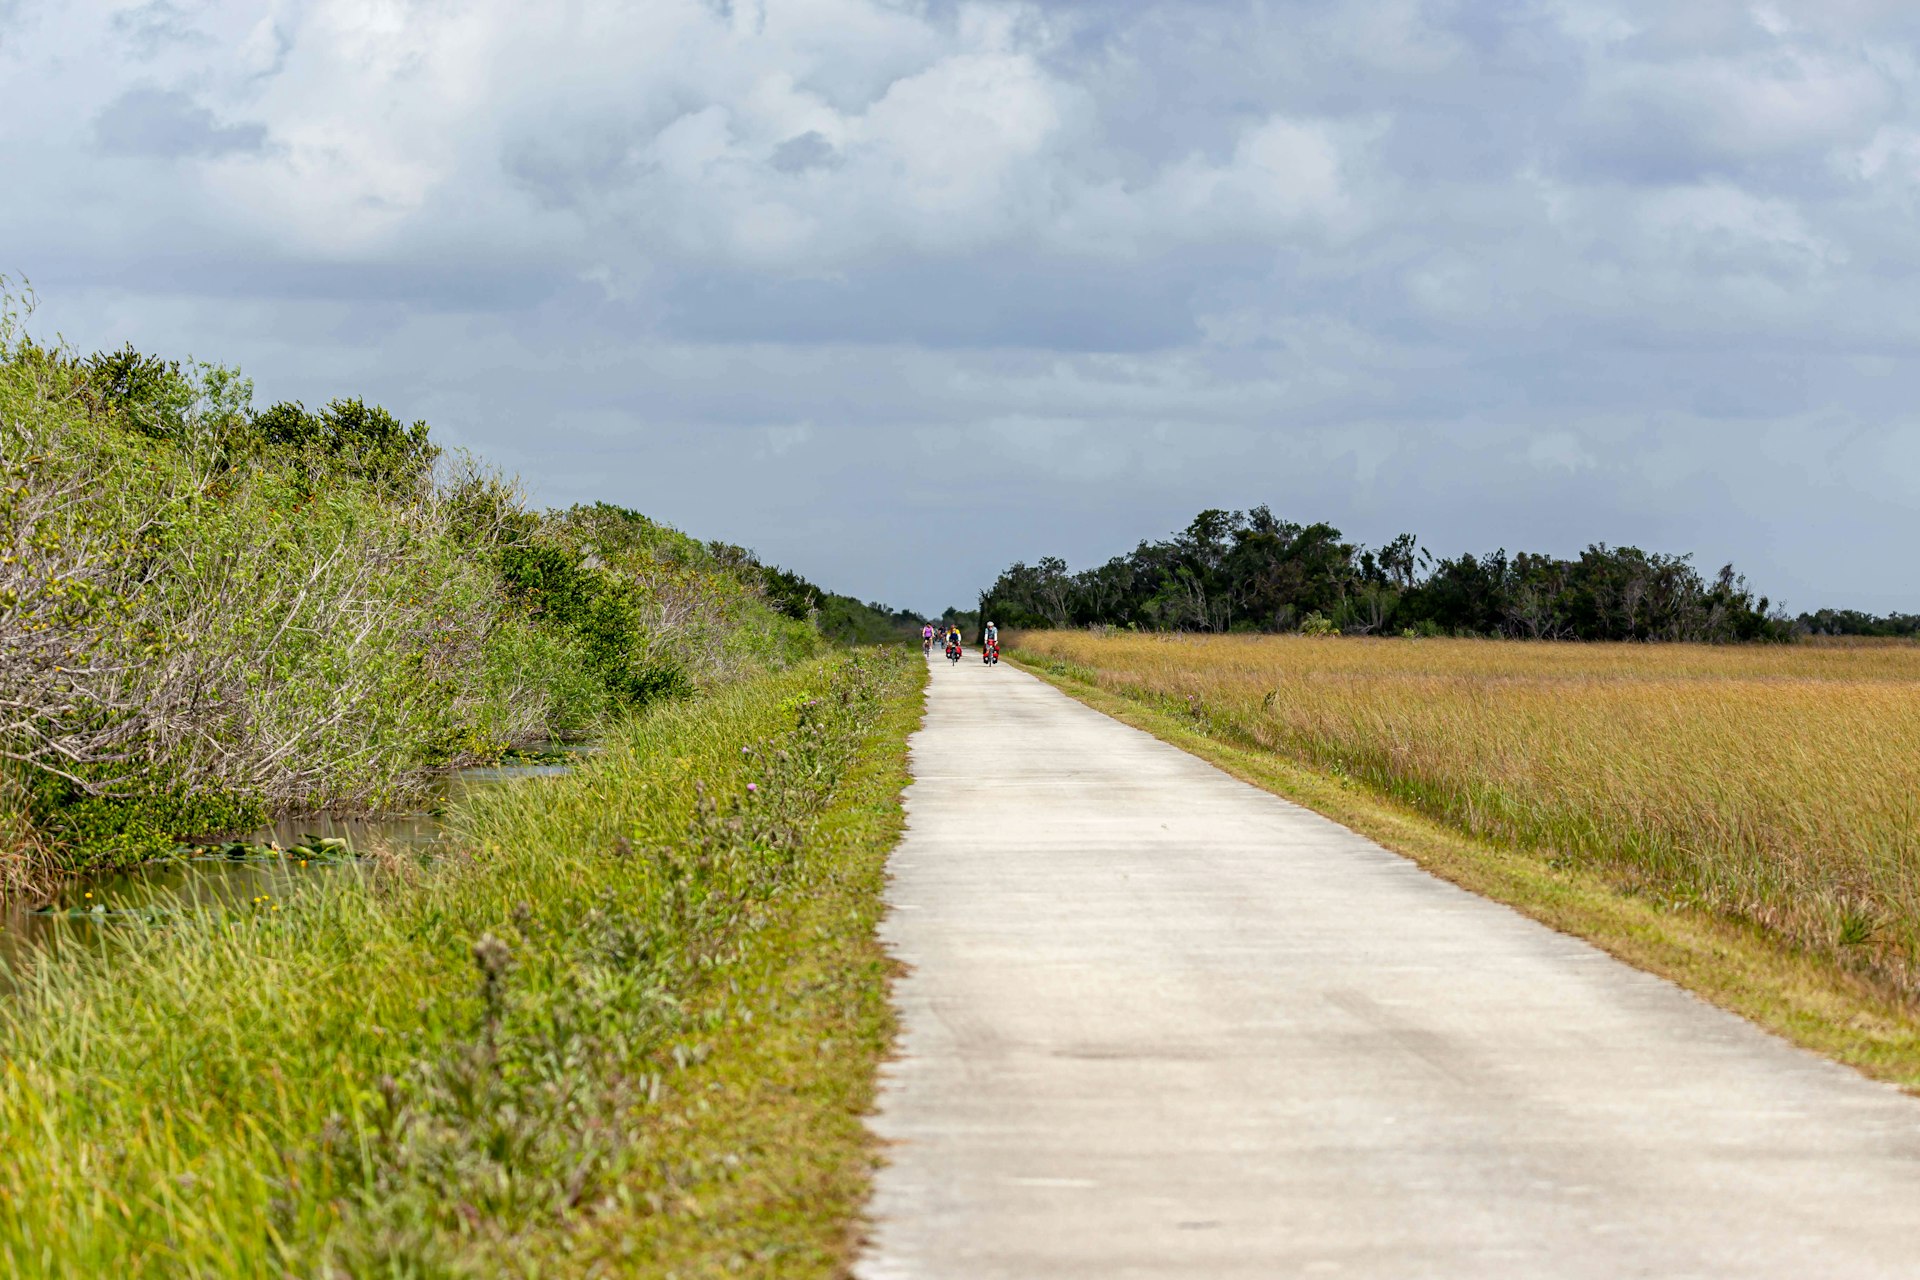 People biking on a paved trail through low scrubby-looking terrain on a cloudy day